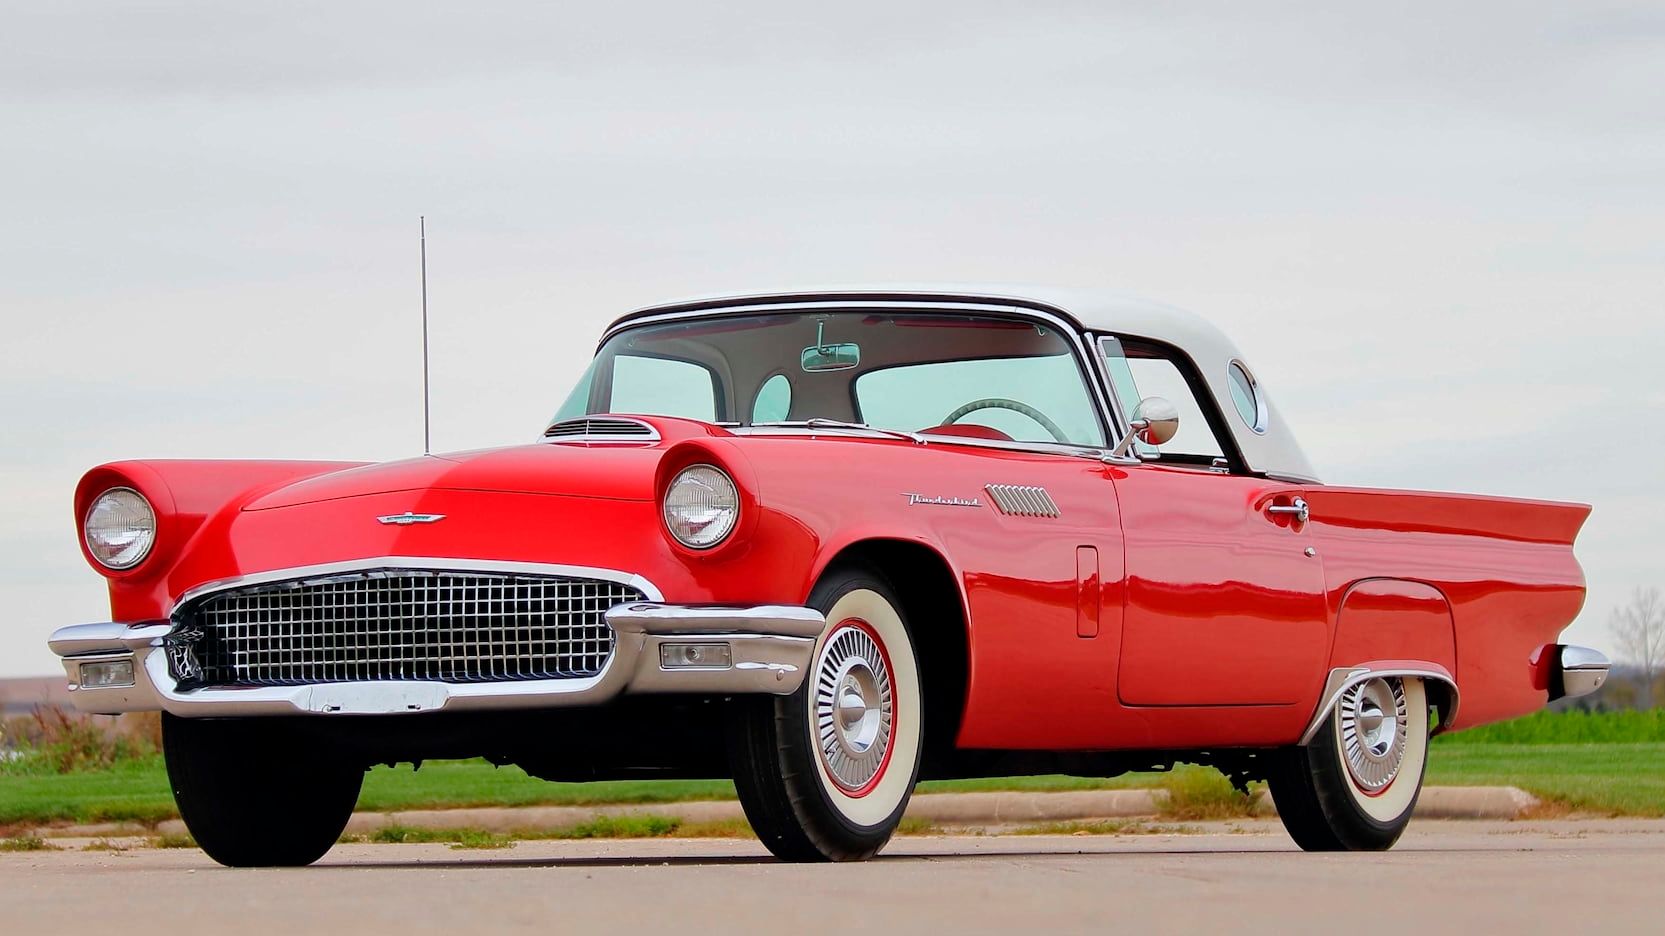 1957 Ford Thunderbird, red with whitewall tyres